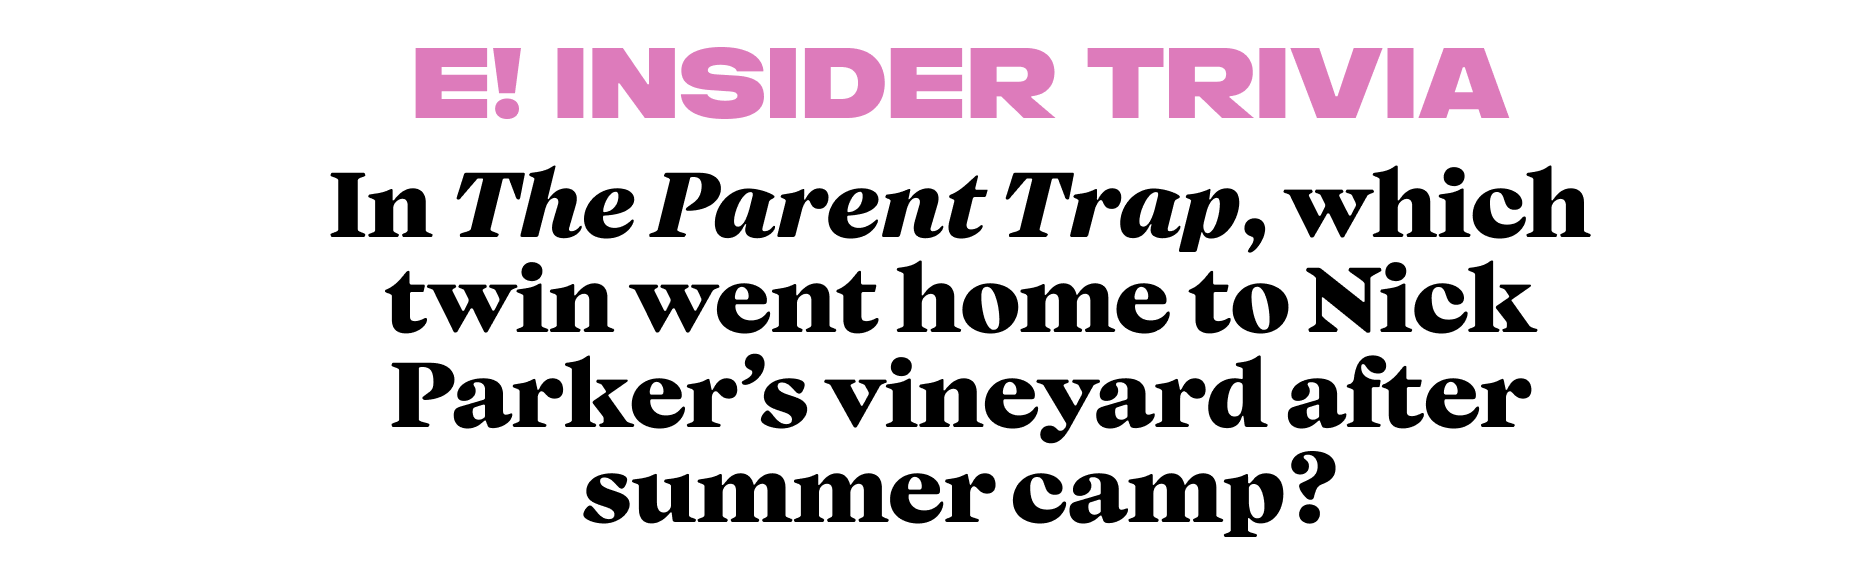 In The Parent Trap, which twin went home to Nick Parker's vineyard after summer camp?